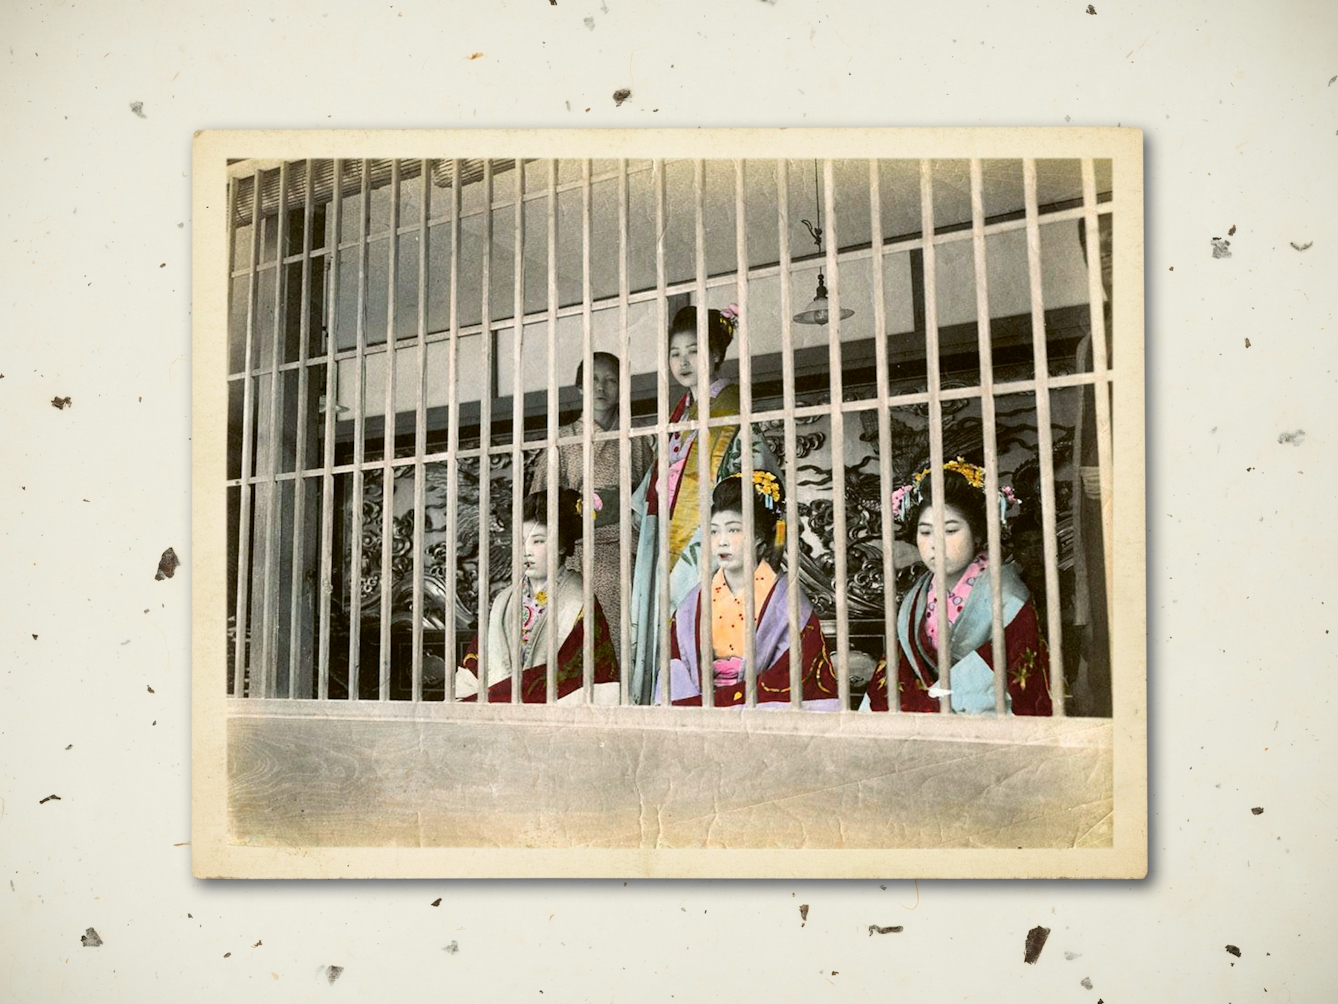 Digital composite image showing a textured rice paper background. Resting on top of the background is an early 20th century black and white photograph showing sex workers on display in the Yoshiwara district of Tokyo. They are pictured seated and standing behind a bared window. Their clothes have been hand tinted. Their expressions are blank and sombre. 